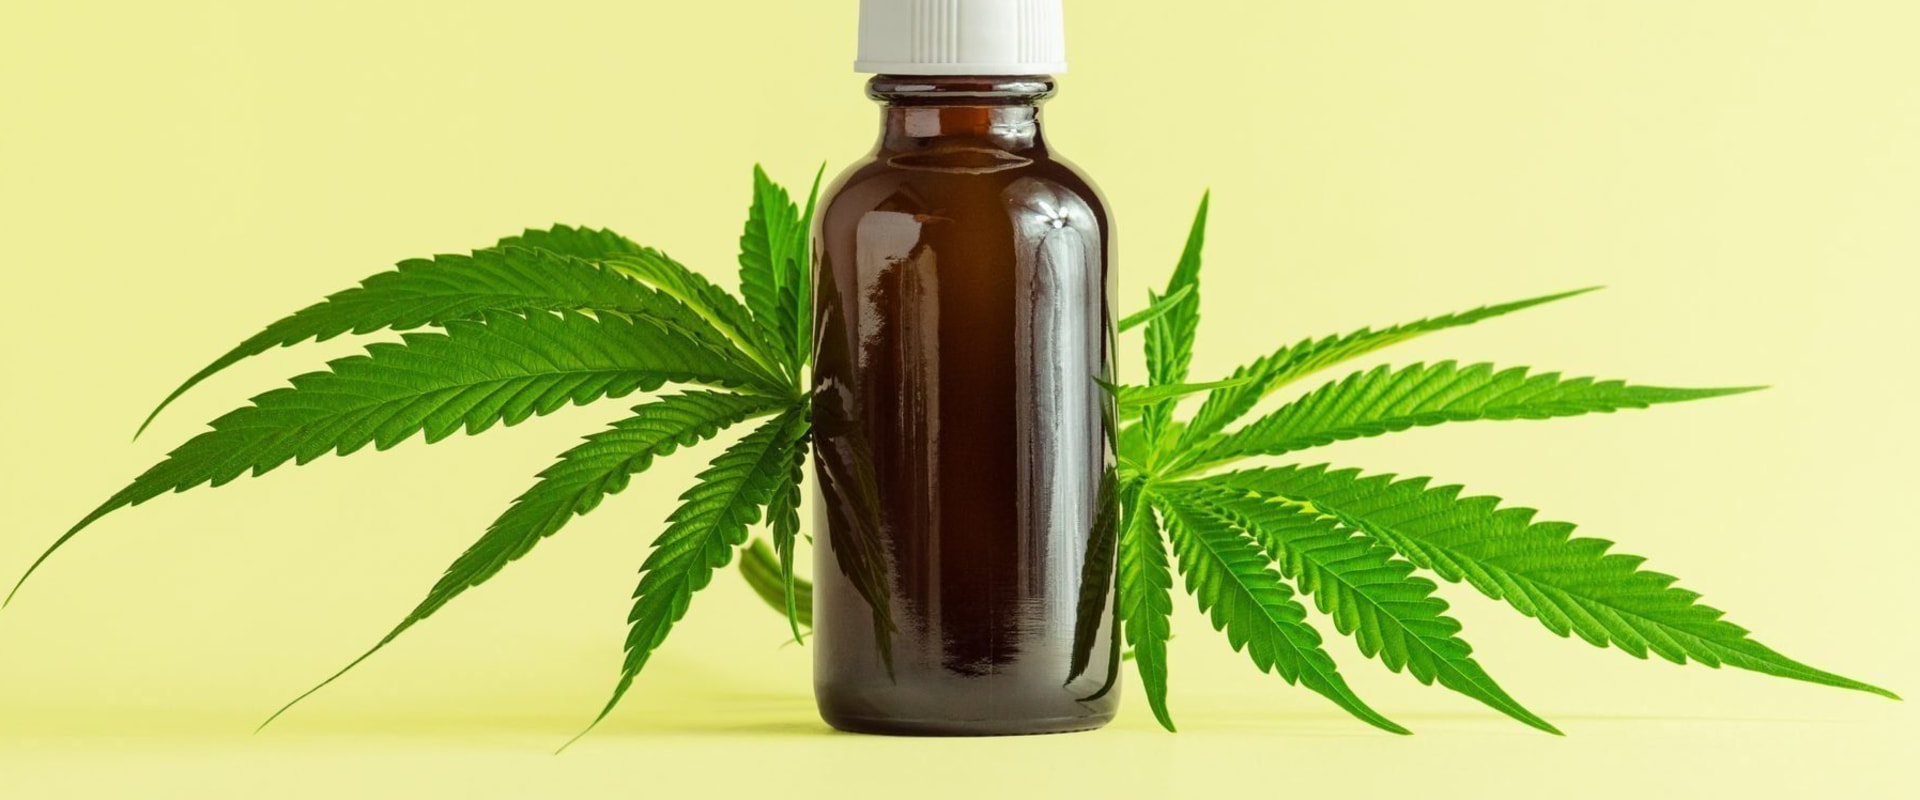 What are the Benefits of Taking Hemp Oil?